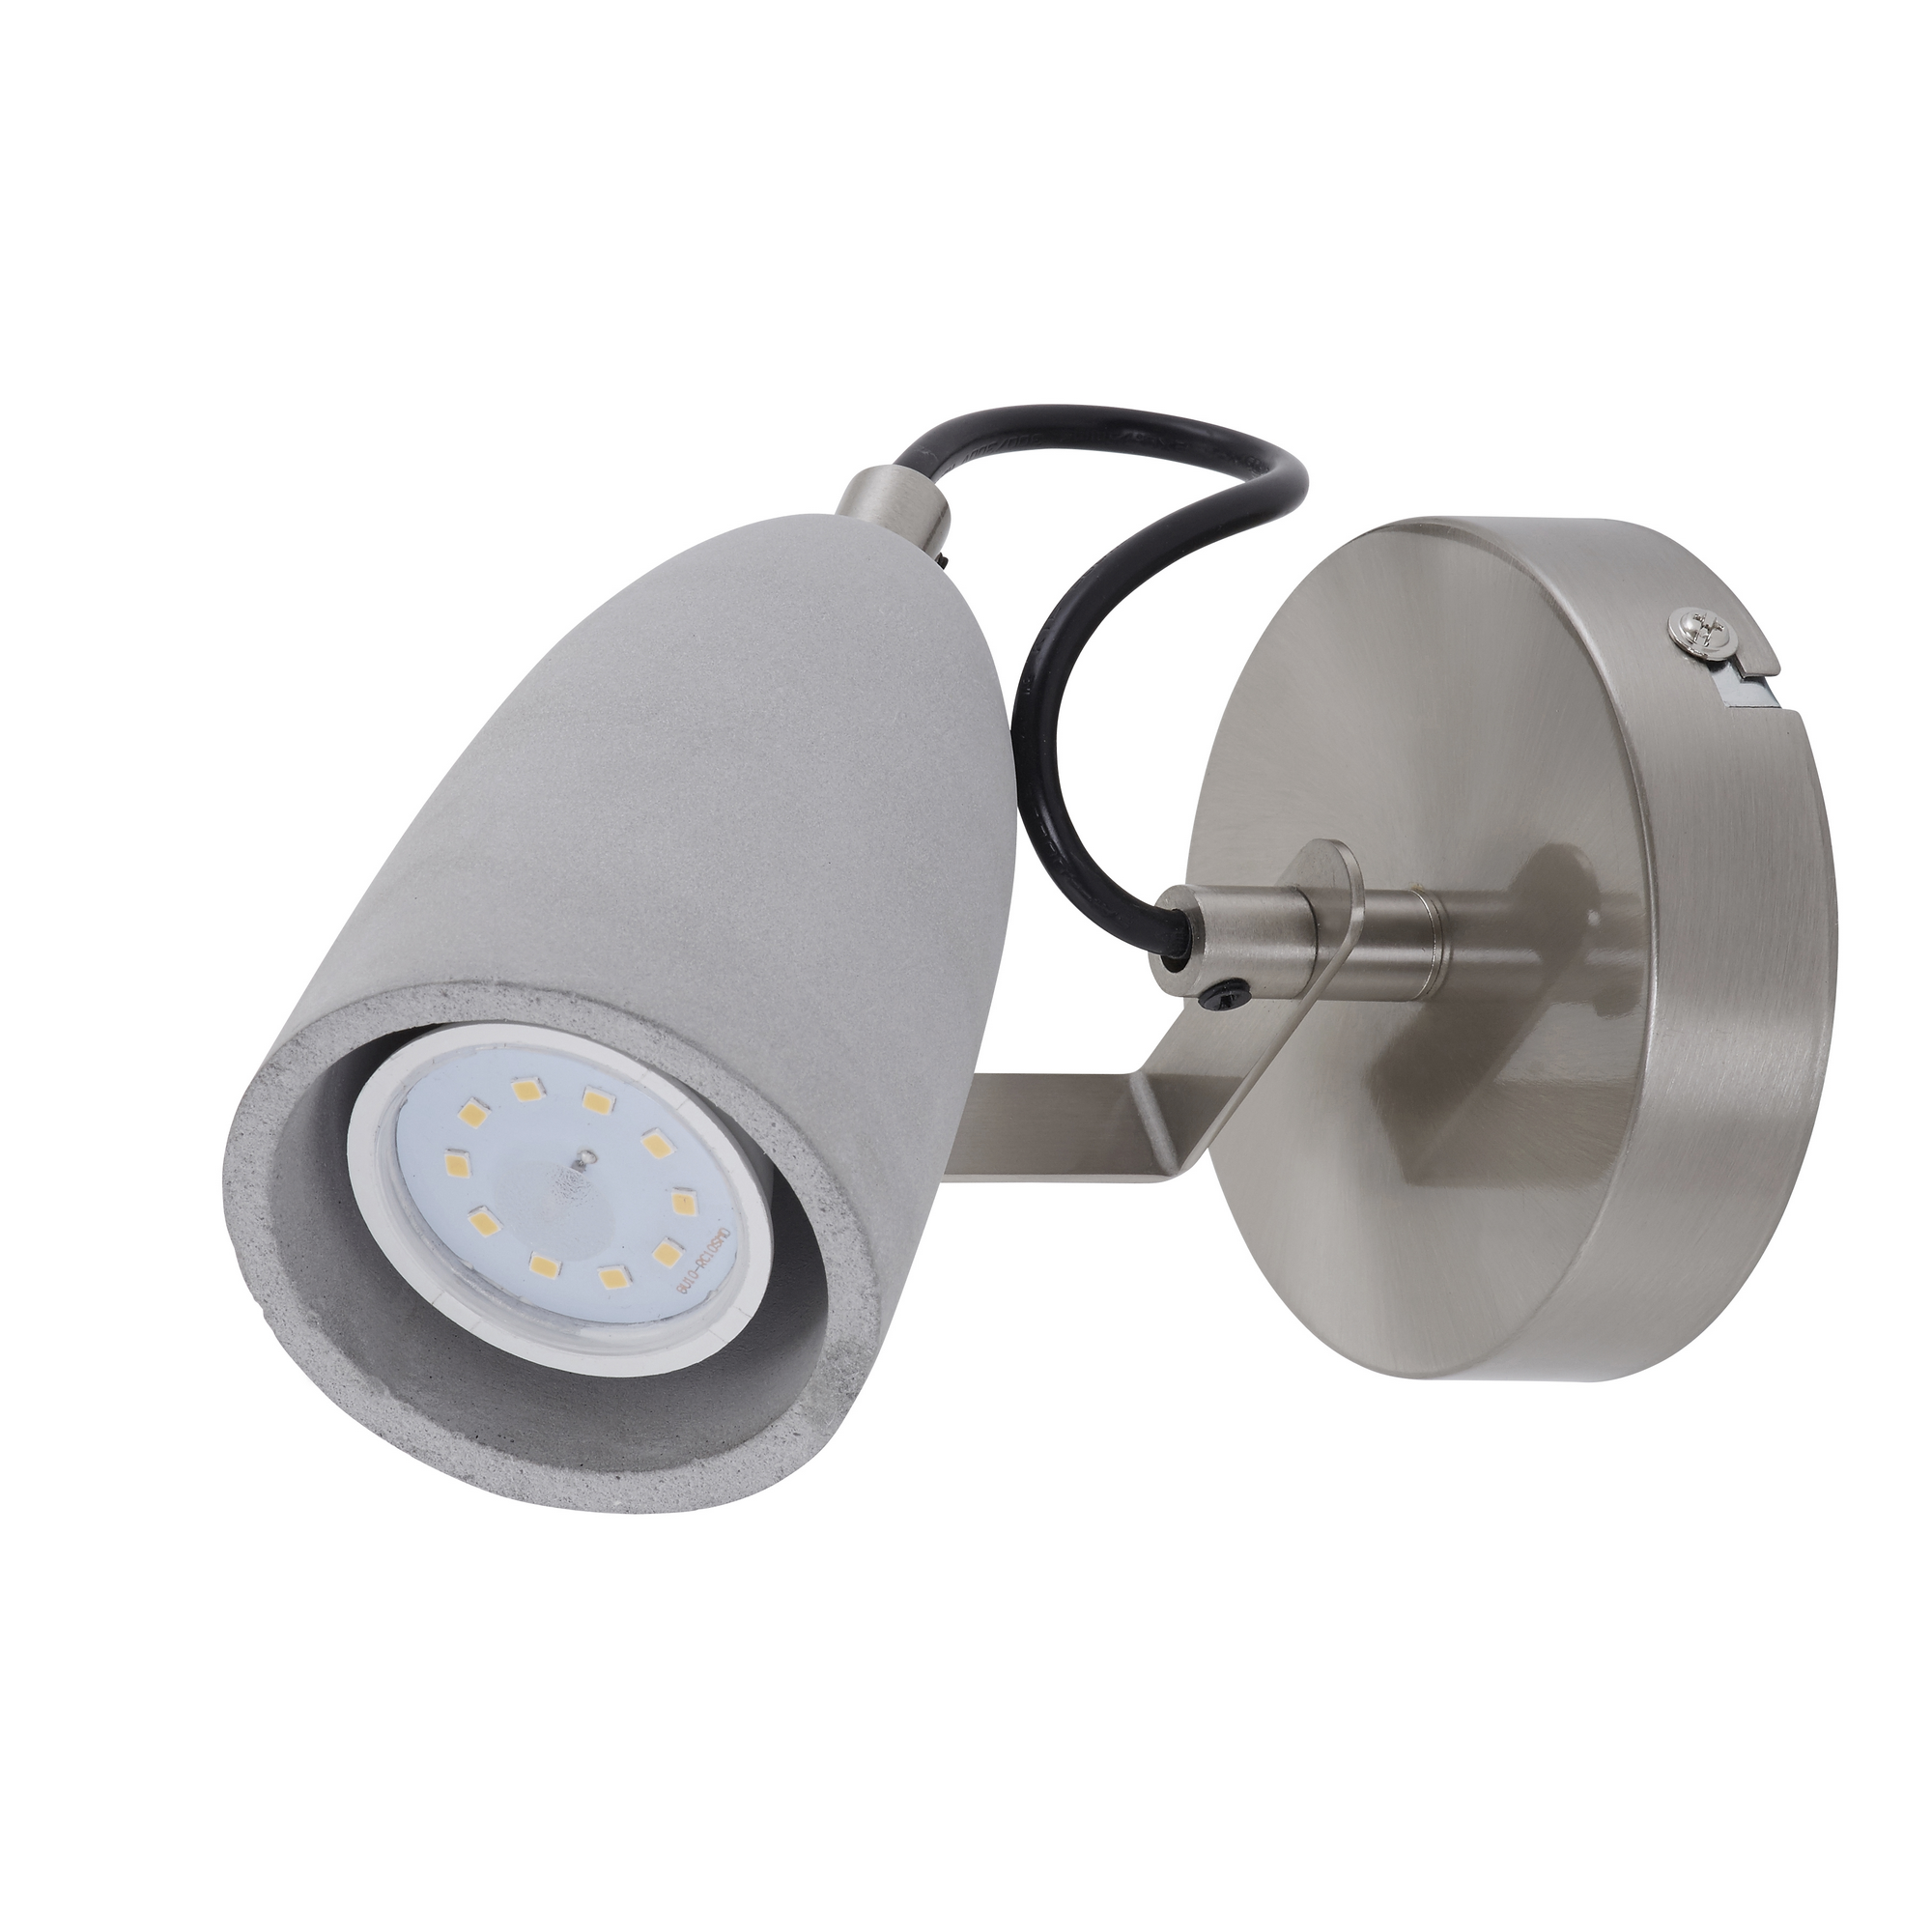 LED-Wohnraumstrahler 'Thimble' 1-flammig 400 lm nickelfarben + product picture